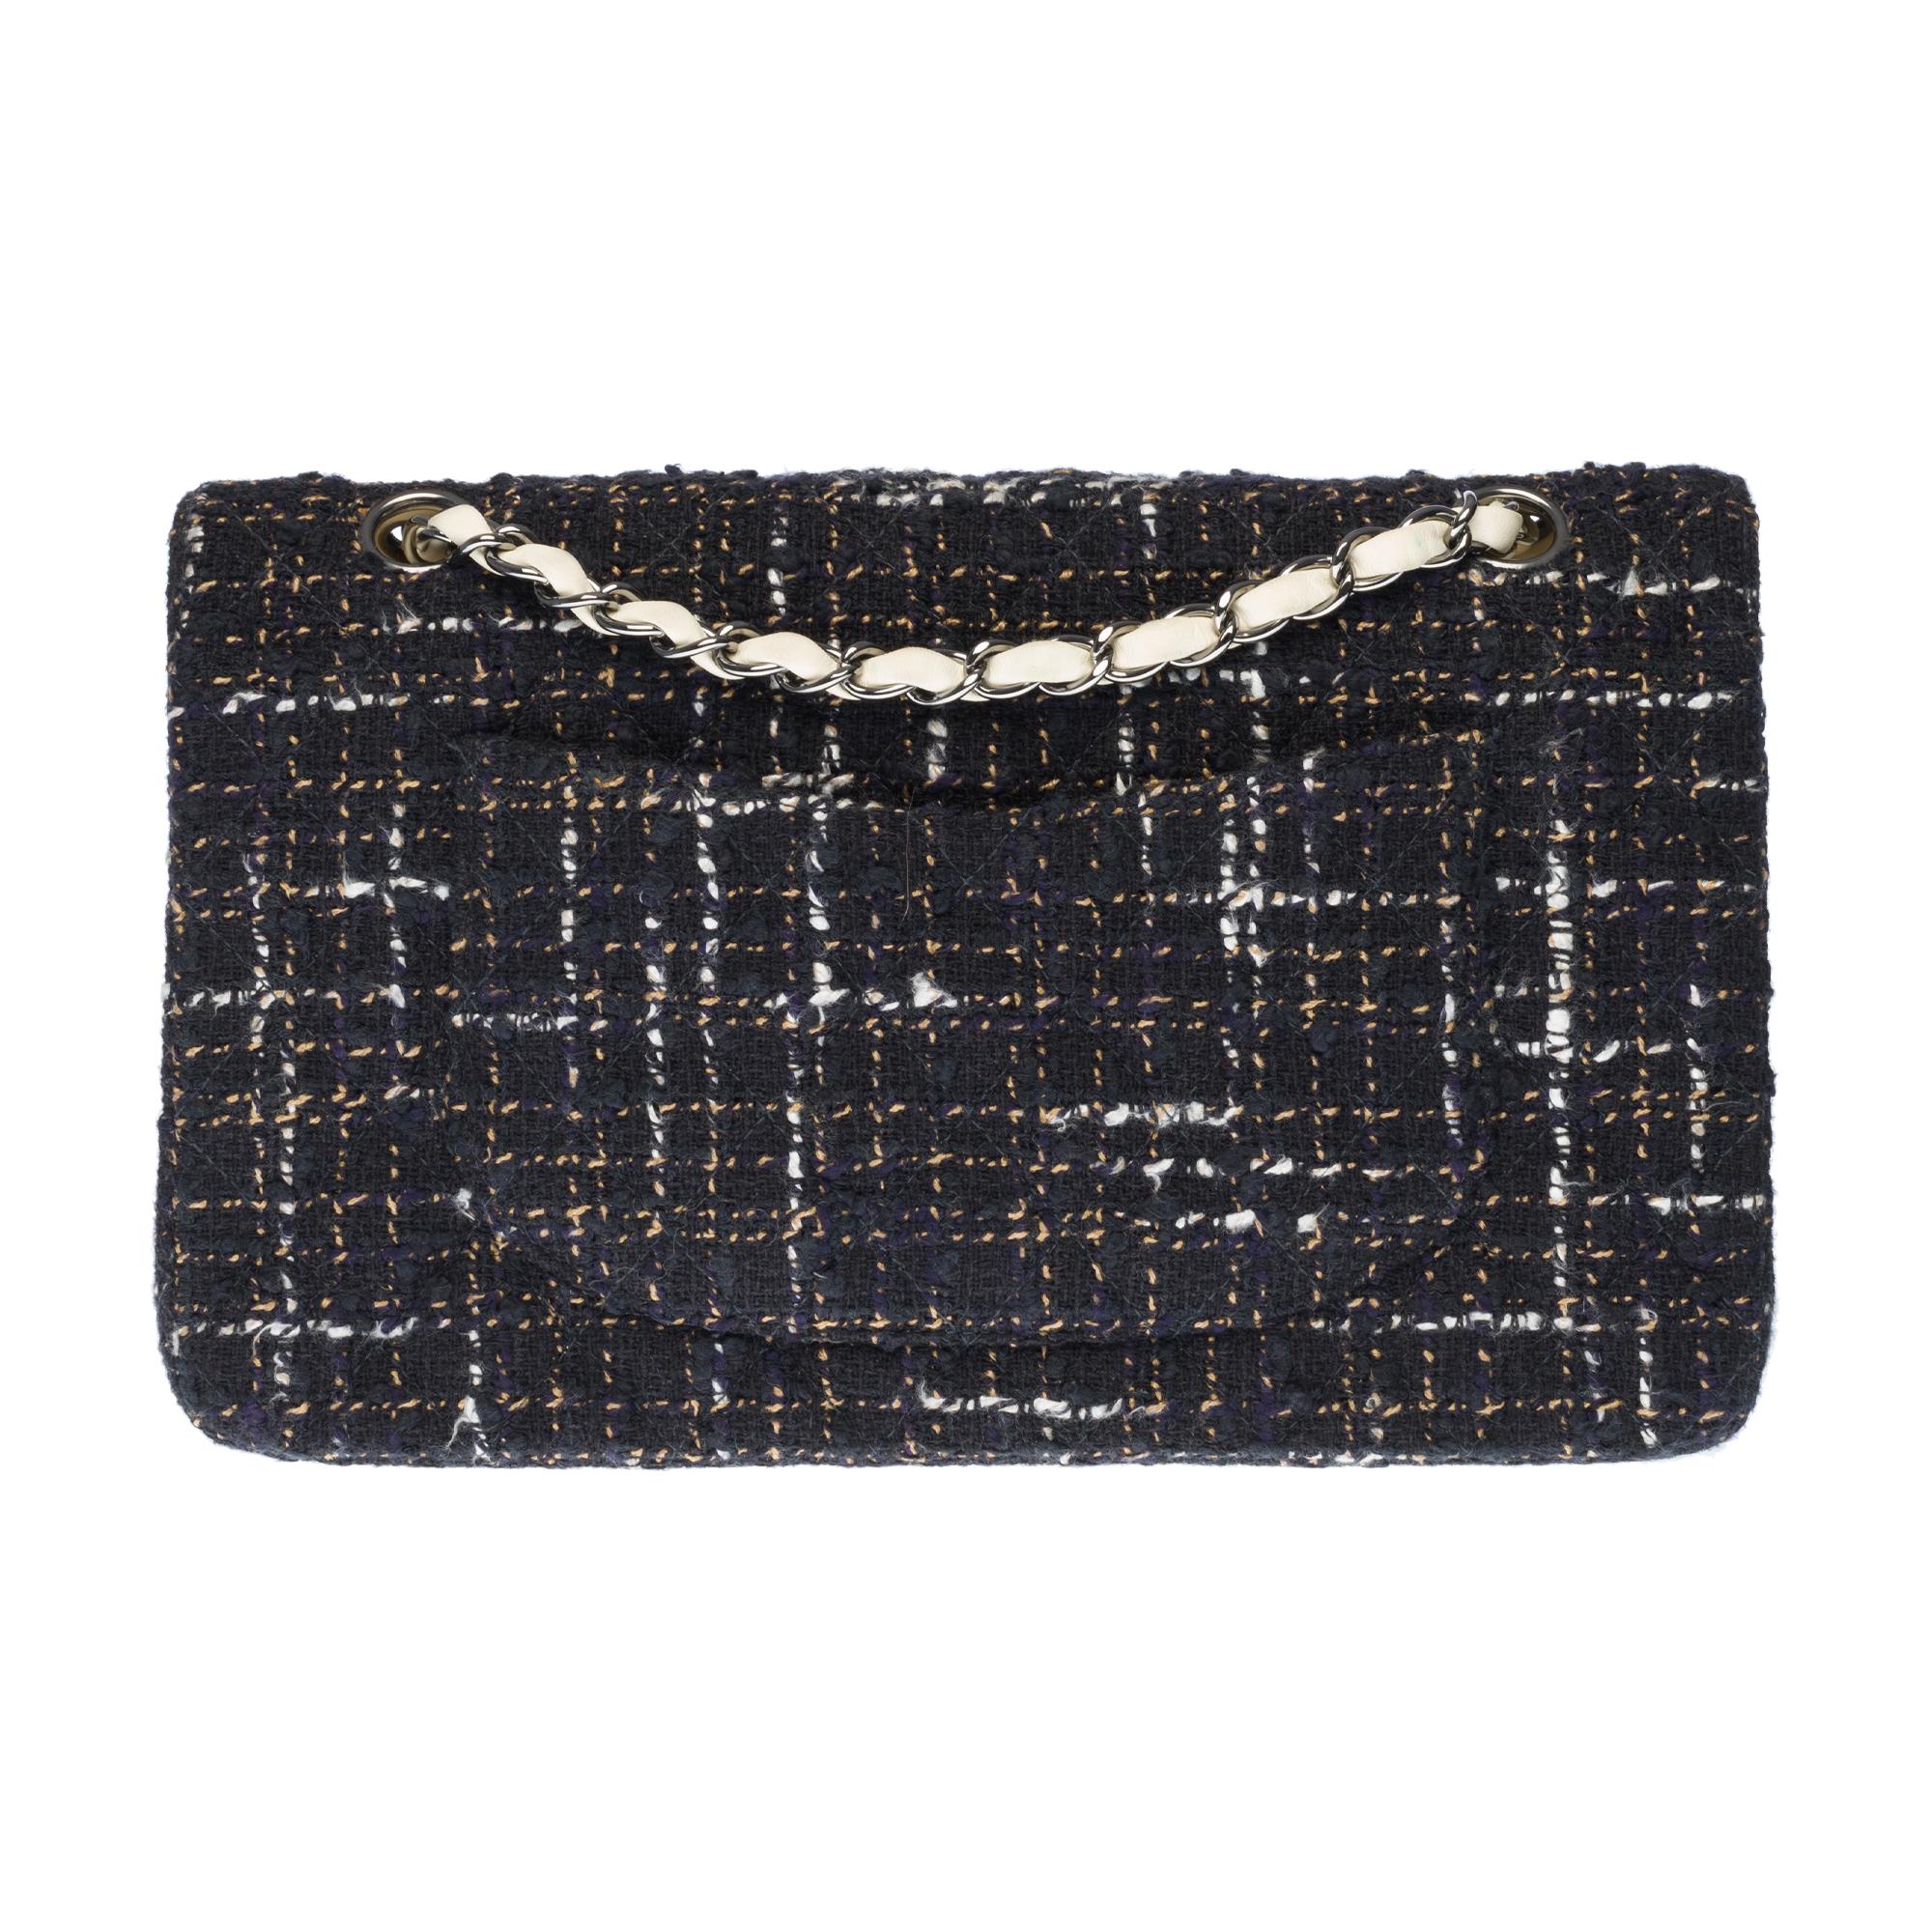 Rare and stunning Timeless double flap bag in black and white quilted Tweed, silver metal trim, silver metal handle intertwined with white leather allowing a hand or shoulder support.
1 patch pocket on the back of the bag.
Padded flap closure,